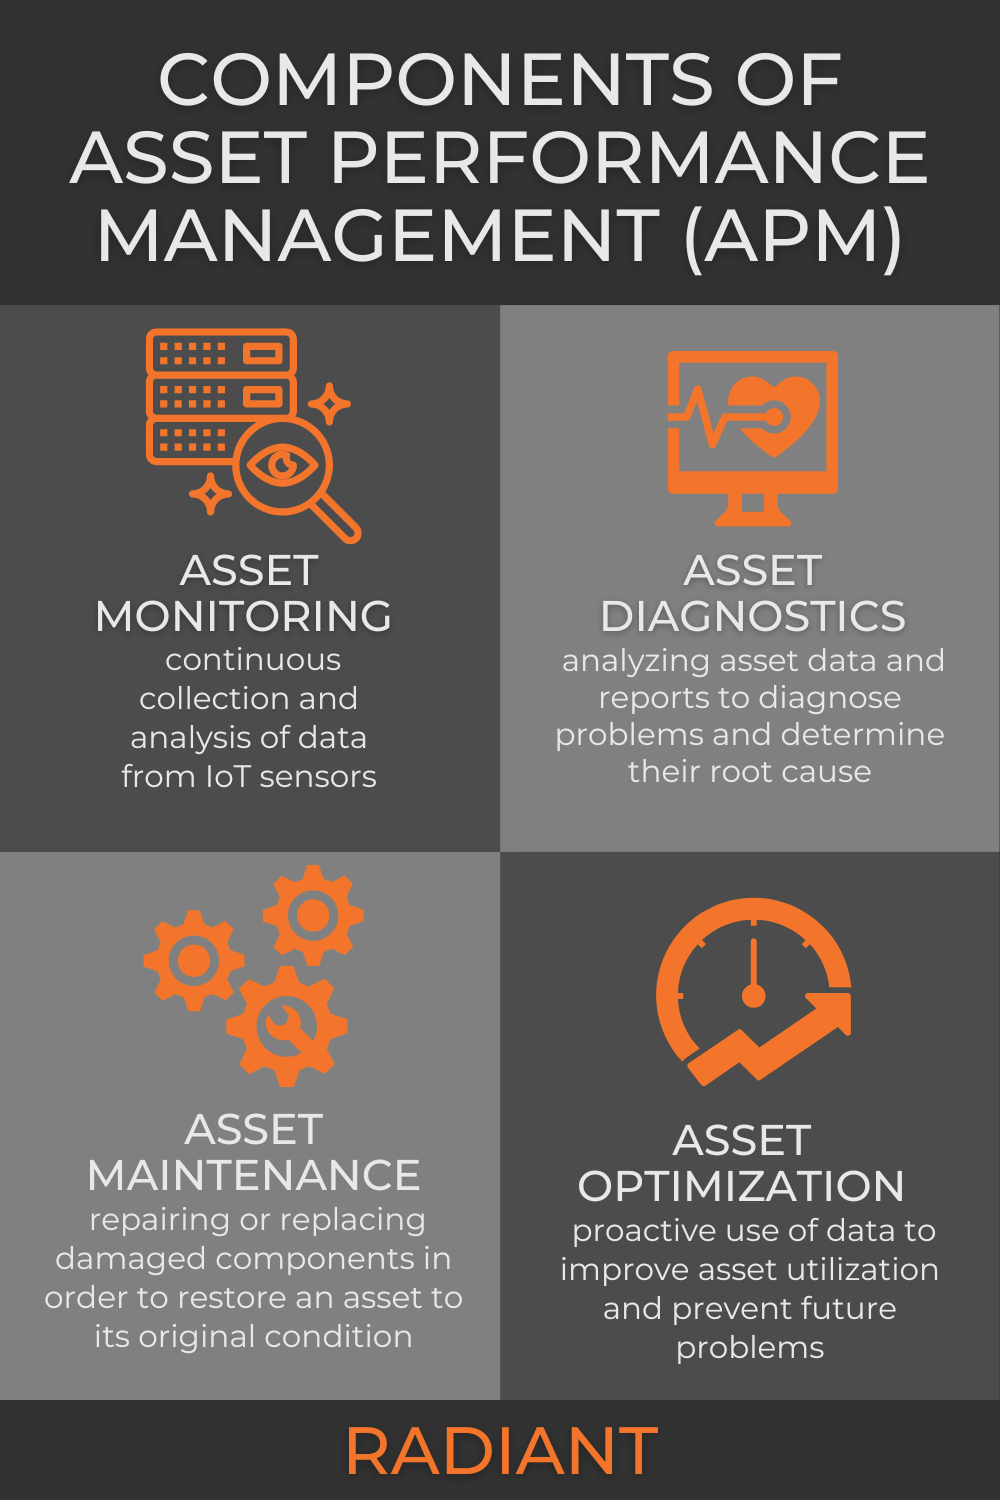 What Is Asset Performance Management - Performance Asset Management - Asset Performance Management Solution - Asset Performance Management Solutions - Asset Performance Management APM - Asset Management - Asset Performance Management - Asset Performance - Asset Performance Management Software